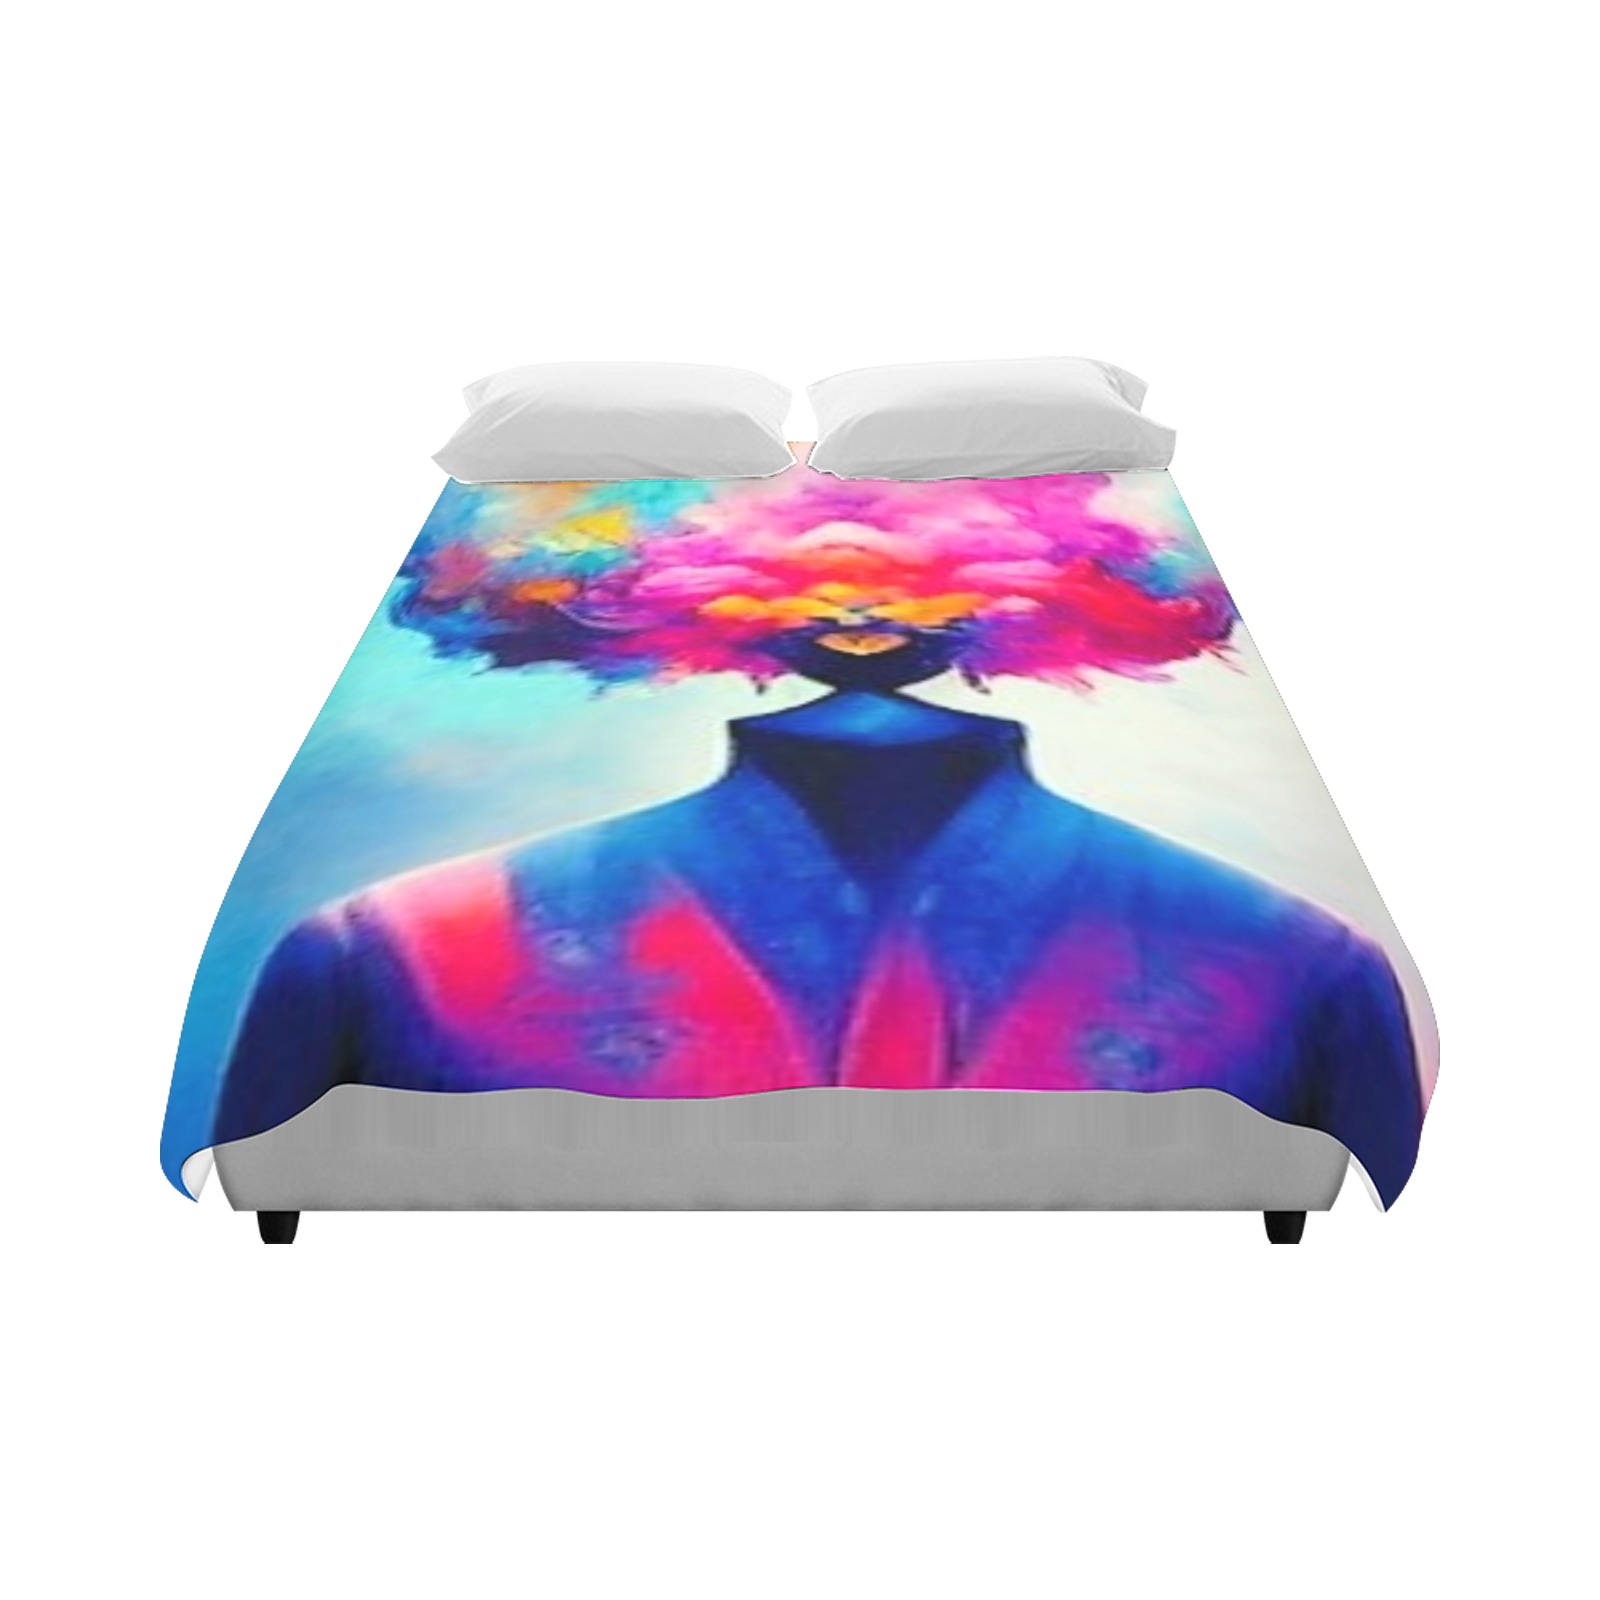 psychedelic figure Duvet Cover 86"x70" ( All-over-print)